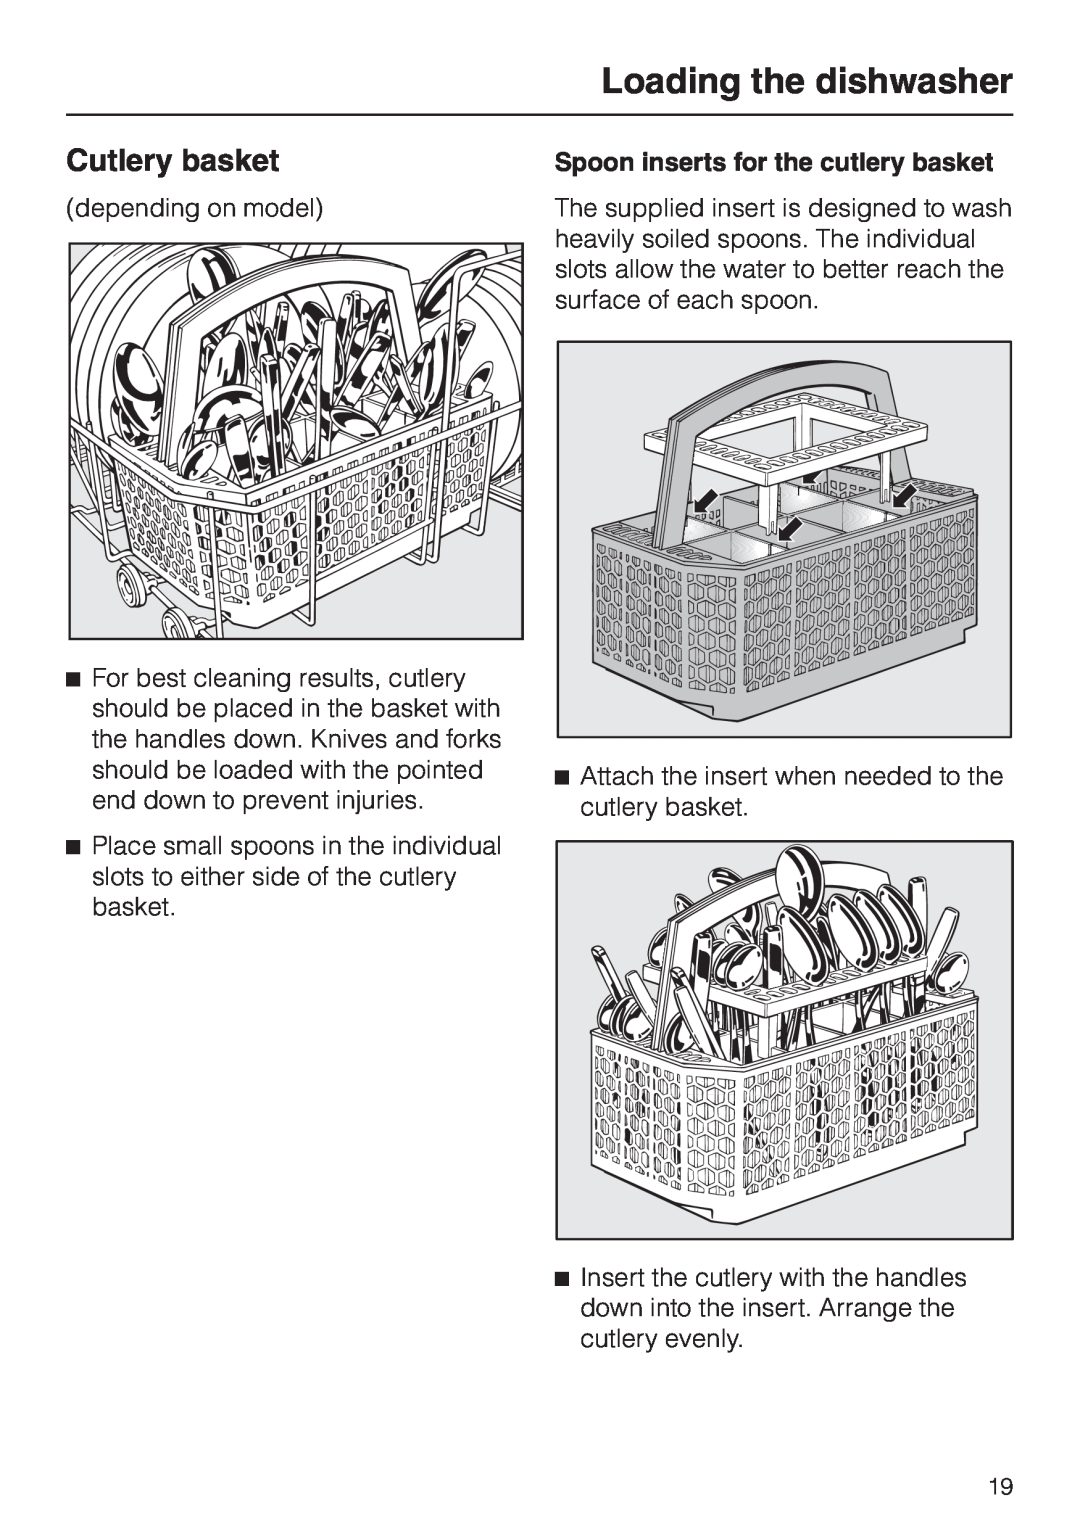 Miele G 2470, G 1470 manual Cutlery basket, Loading the dishwasher, Spoon inserts for the cutlery basket 